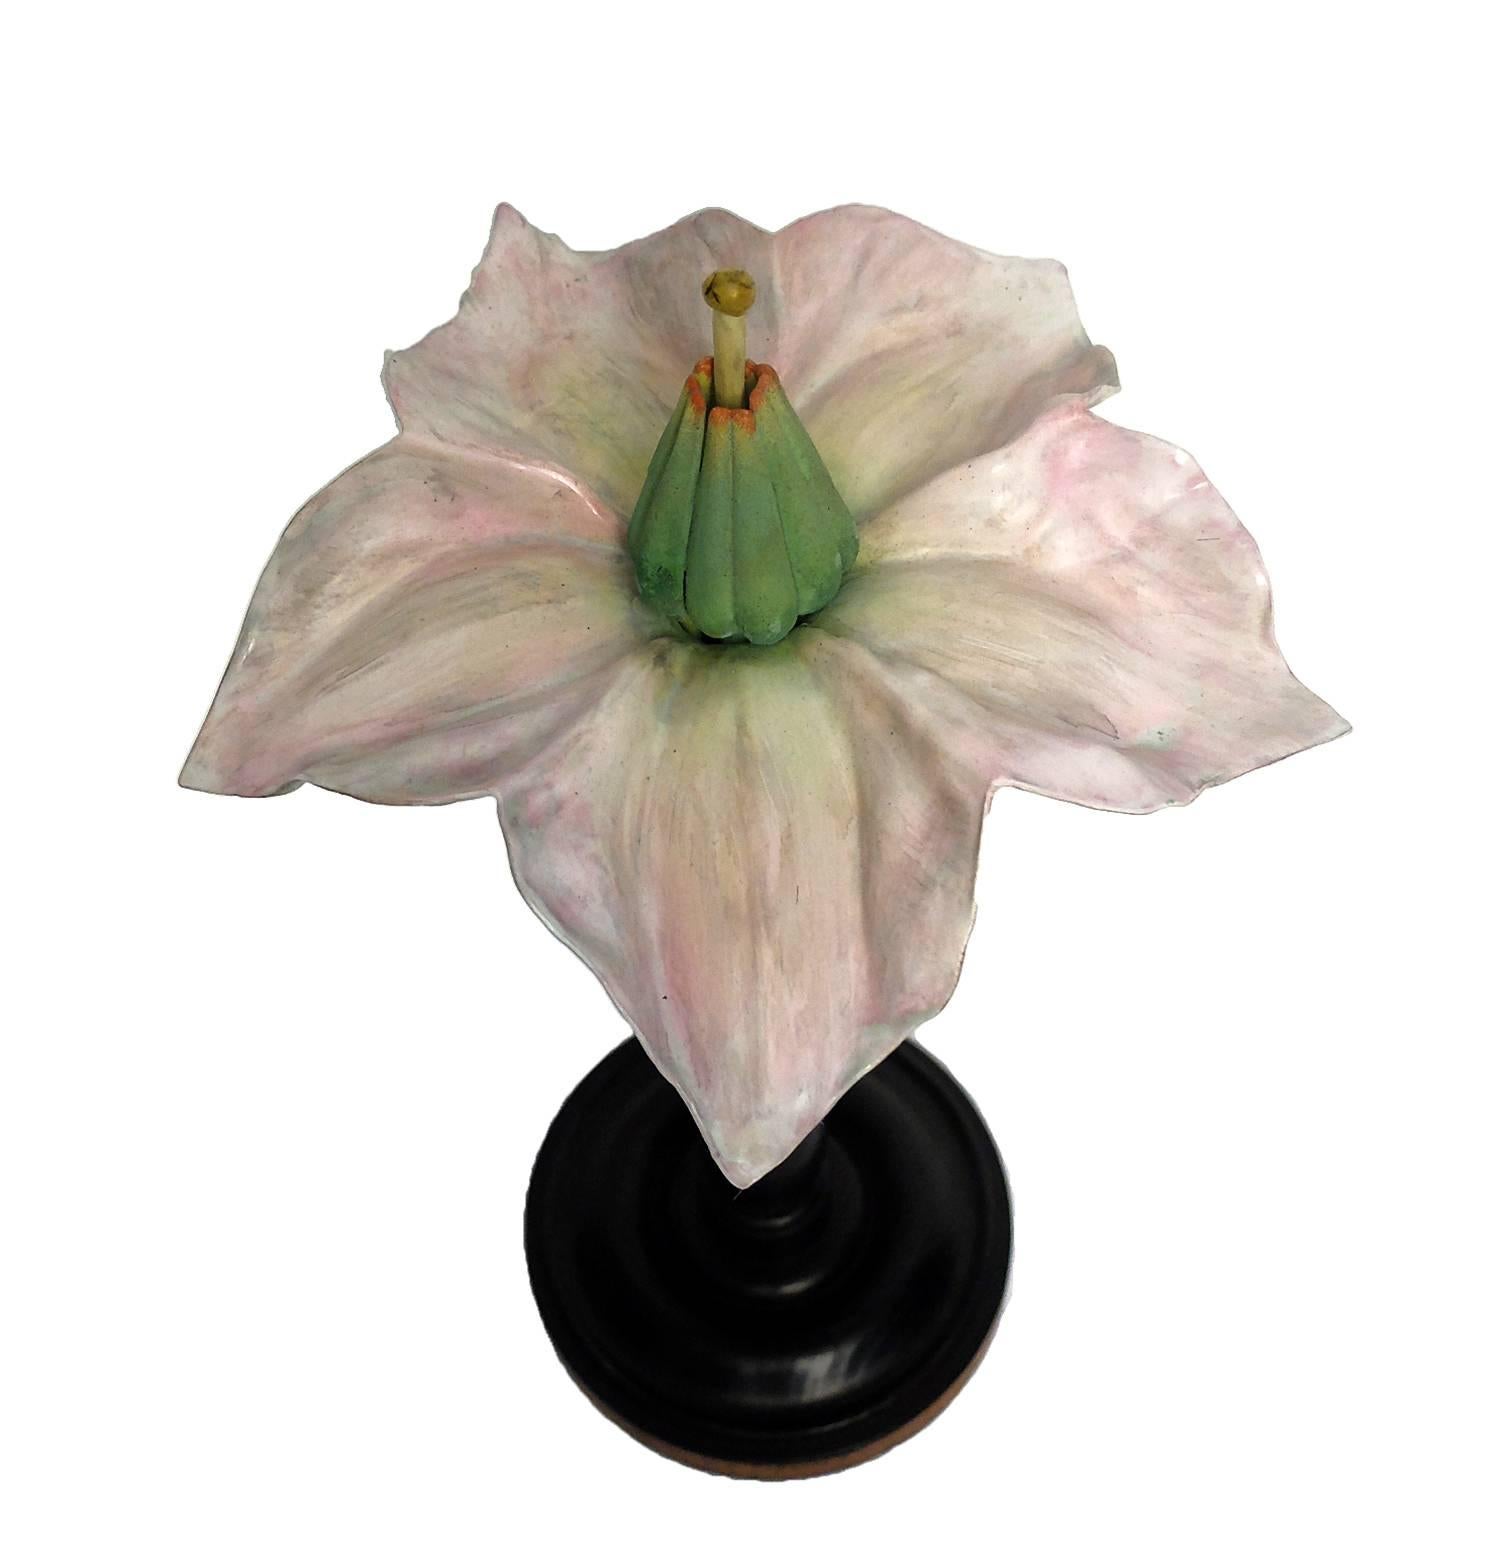 A rare botanic didactical specimen, depicting a Solanum Tuberosum flower pale orange color made out of papier mâché, plaster and wood hand-painted. Extremely detailed, Milan, Paravia, circa 1900